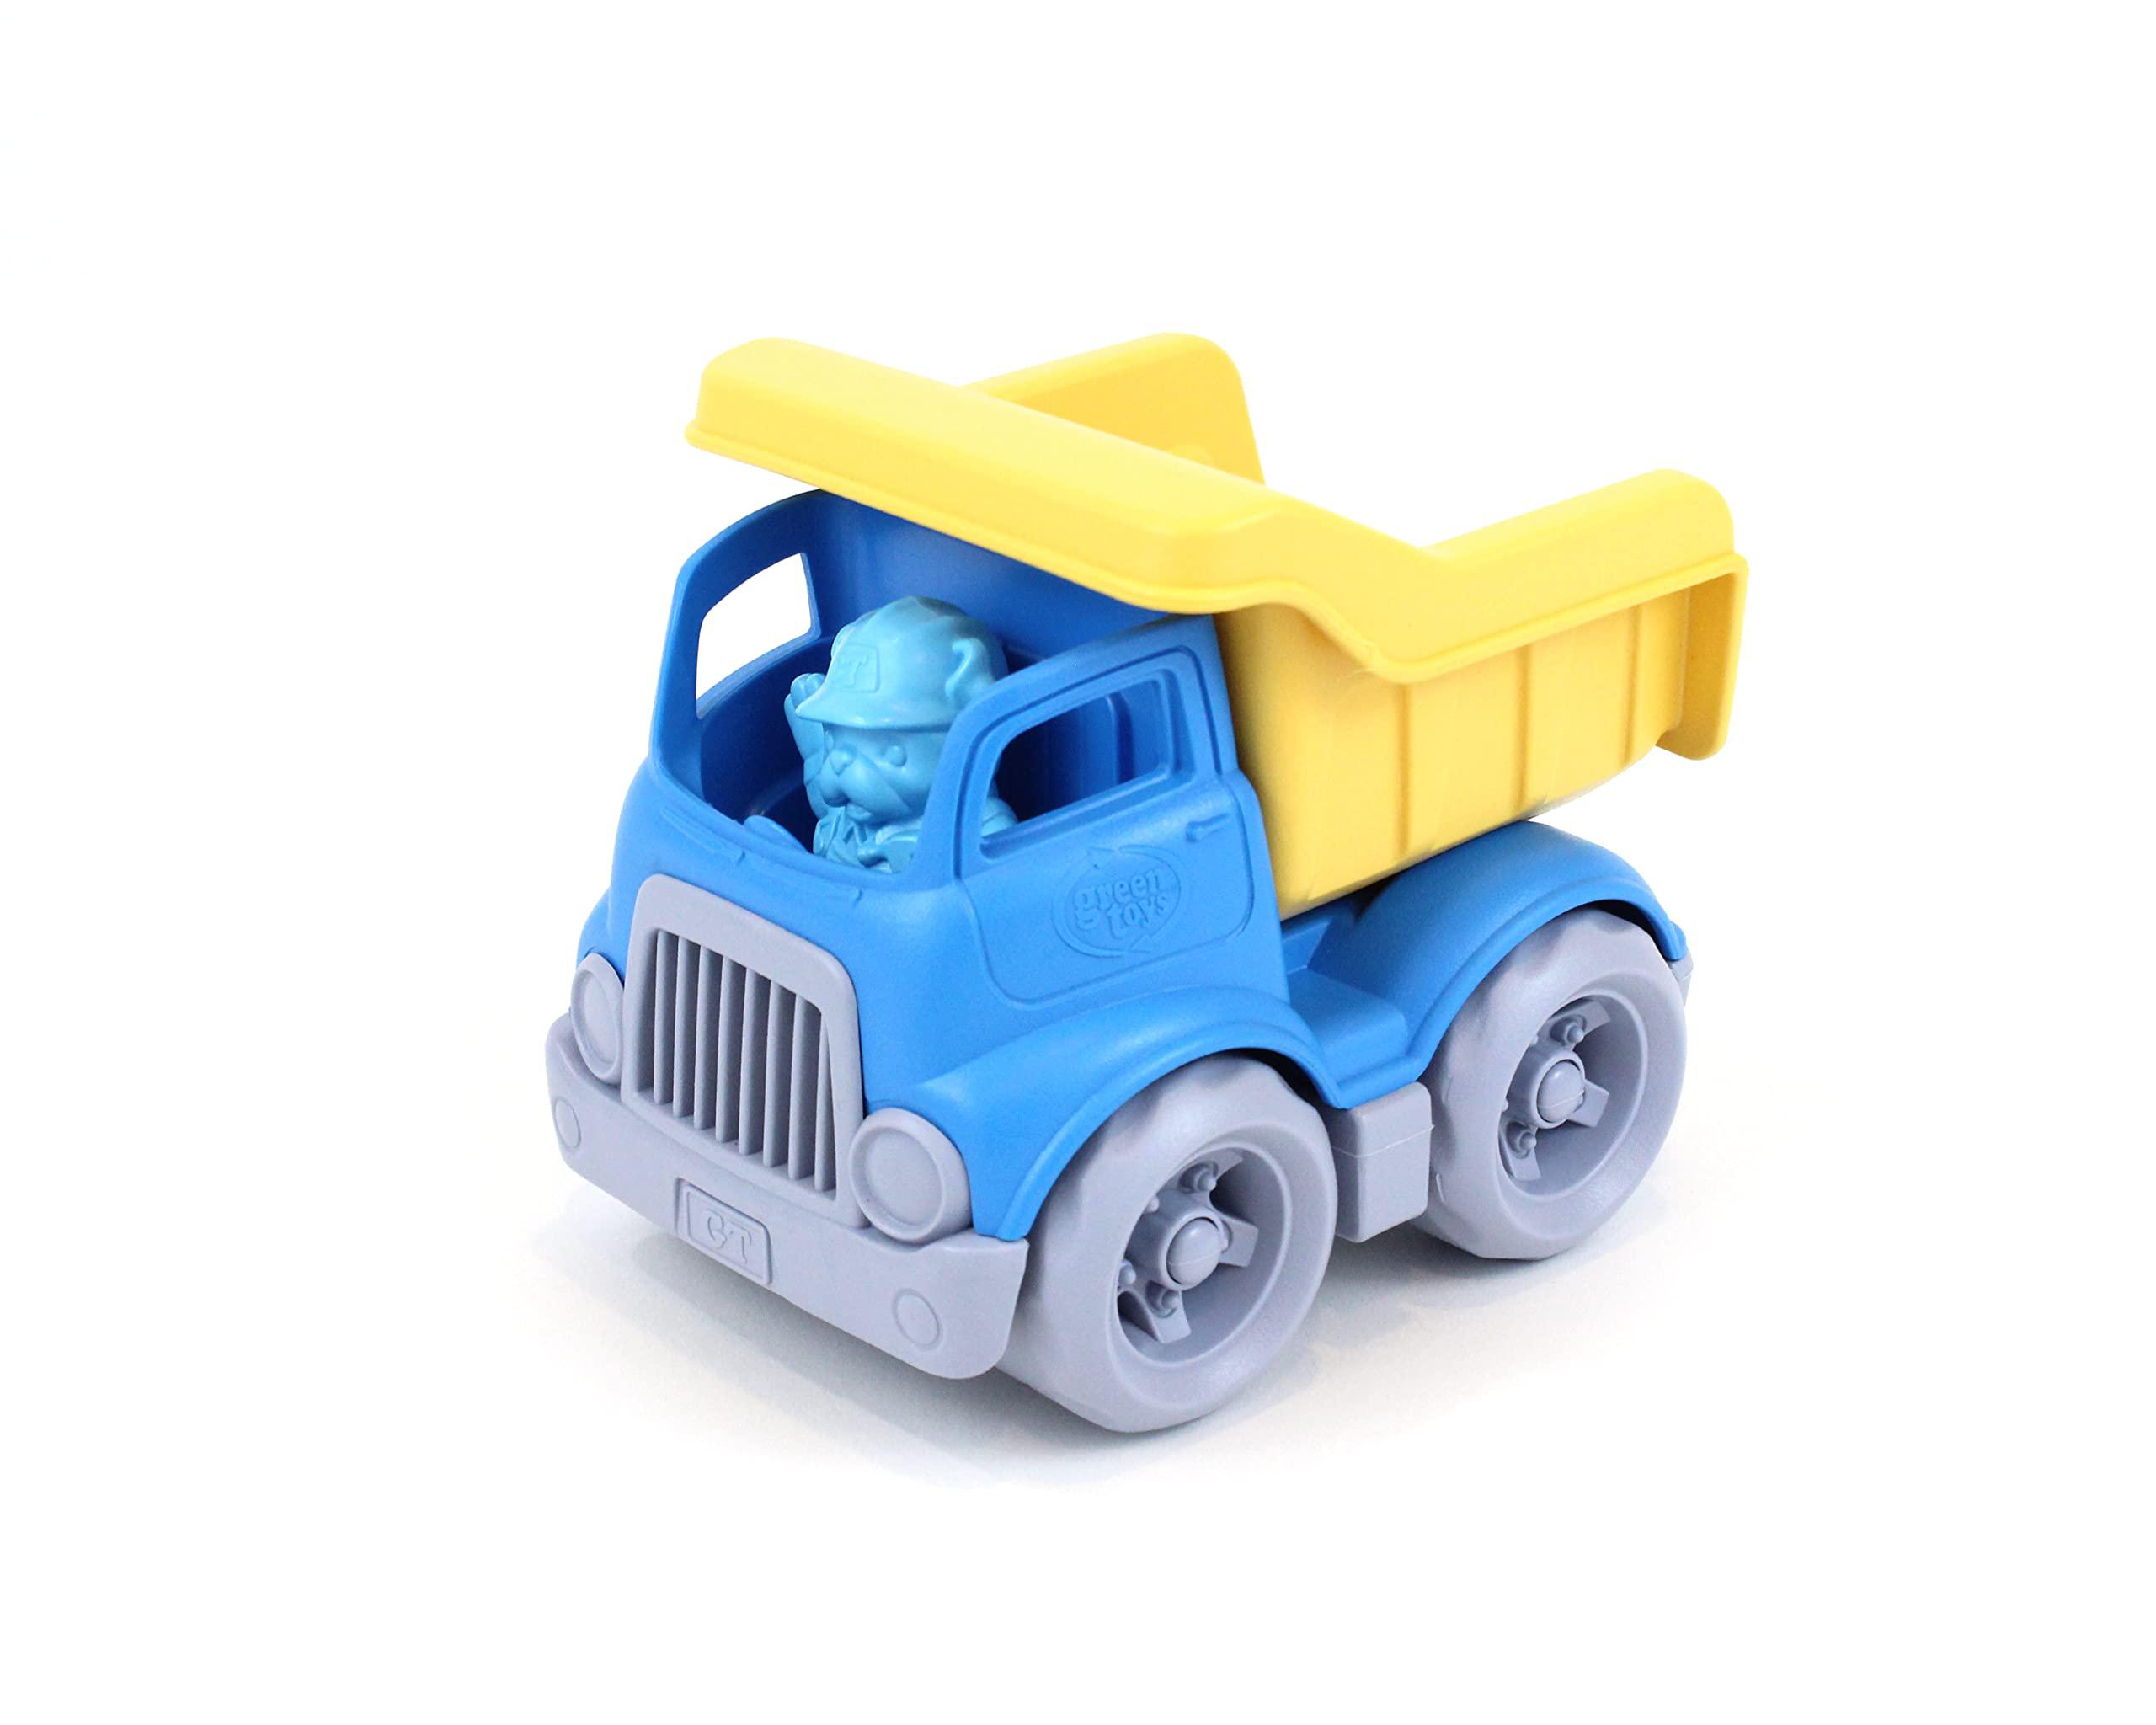 green toys dumper construction truck blue/ yellow, 5.75x7.5x5.5, count of 2